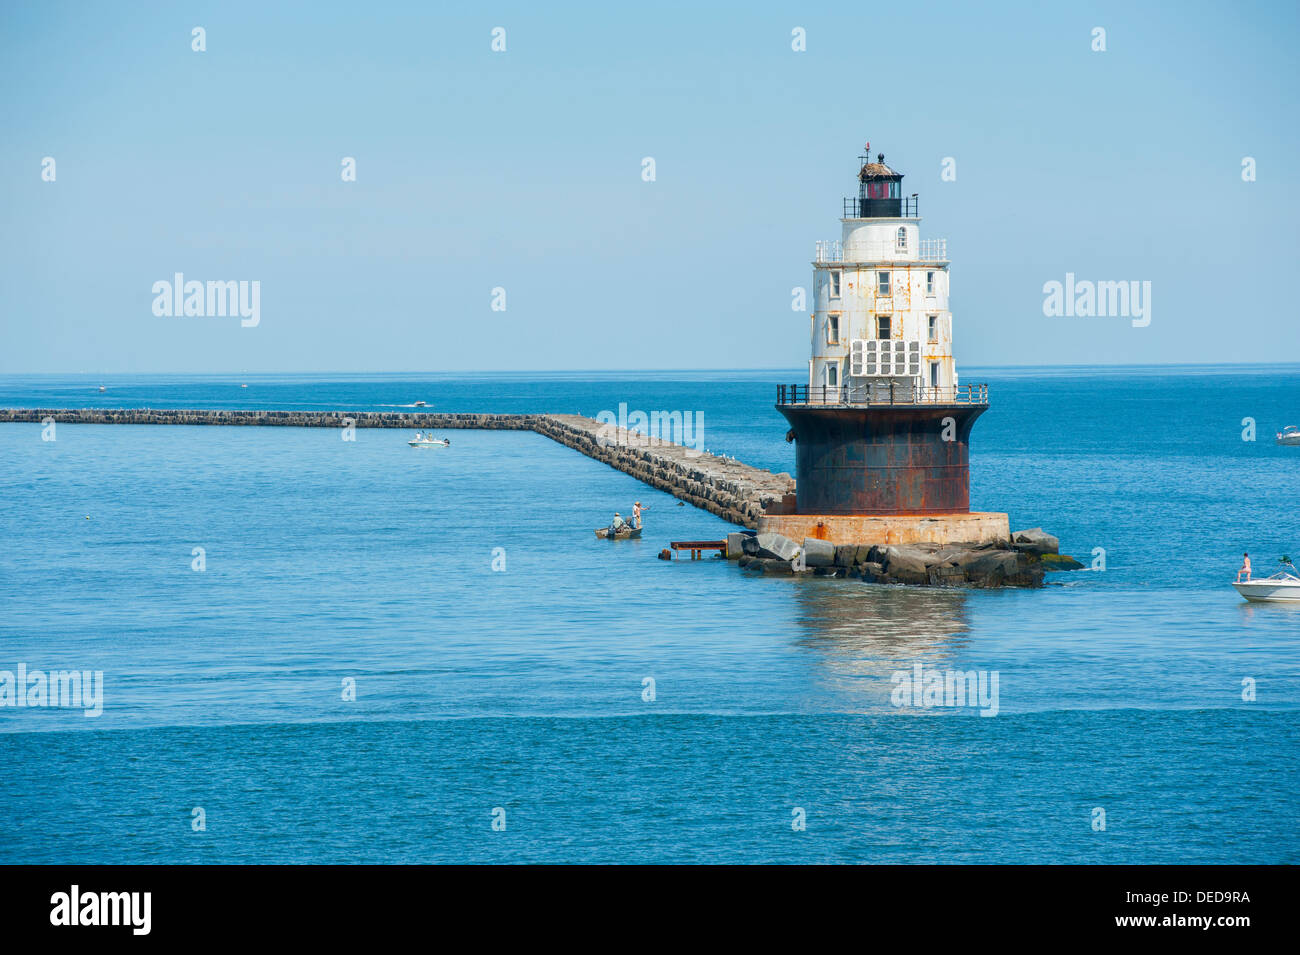 Delaware DE USA Harbor of Refuge Lighthouse in the Delaware Bay near Cape Henlopen fitted with solar panels sits on a breakwater Stock Photo